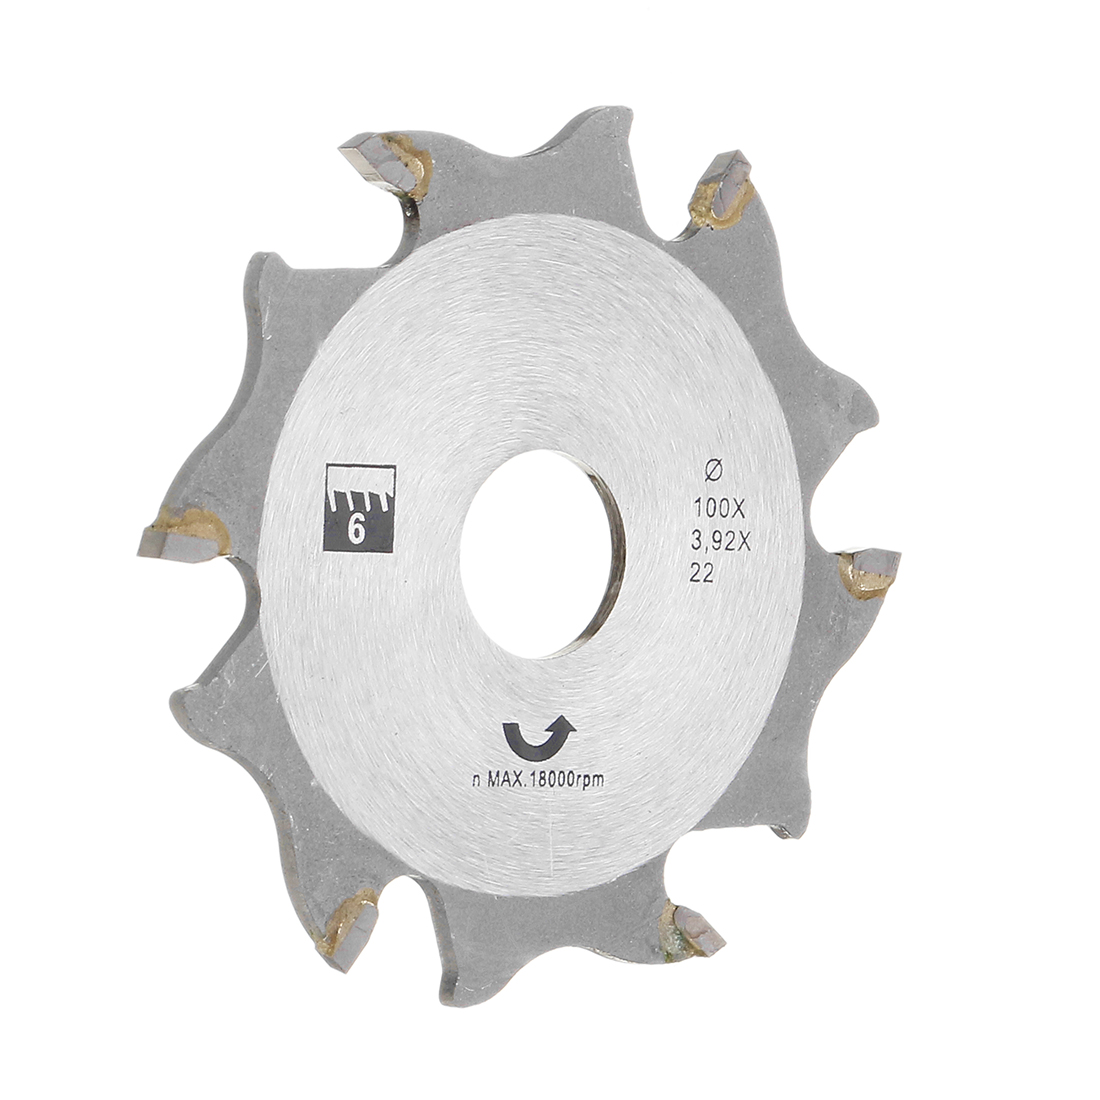 Hilda 100mm Saw Blade for Biscuit Jointer Woodworking Saw Blade